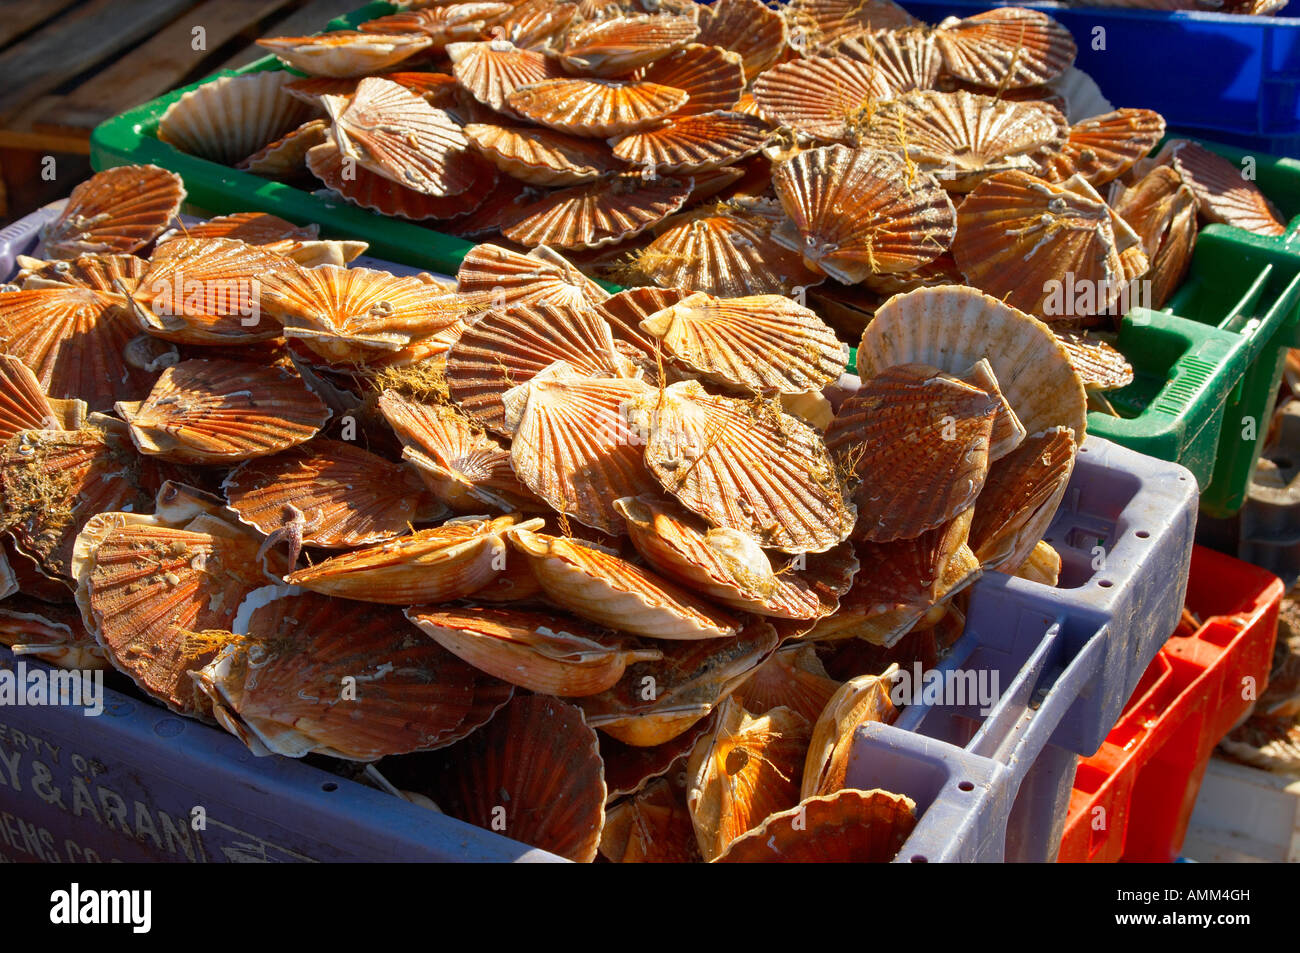 Fresh live scallops being landed off a fishing boat in Honfleur harbour, France Stock Photo